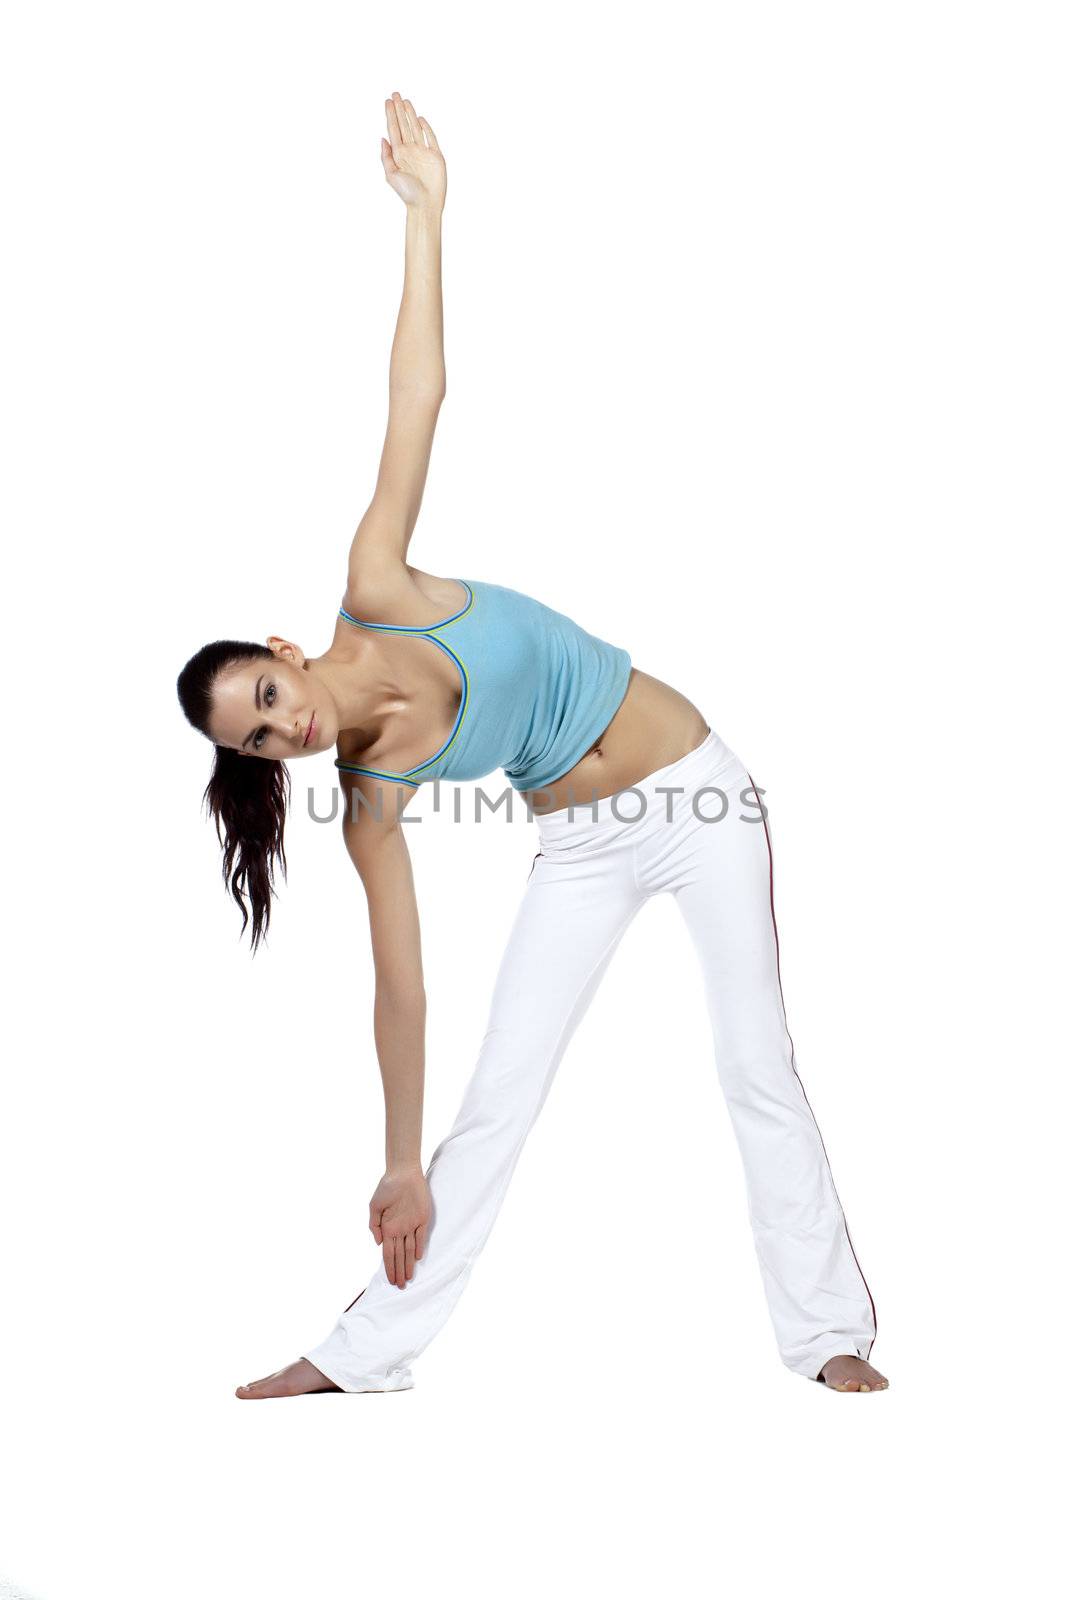 Isolated  image of young woman doing the triangle position in yoga exercise against a white background